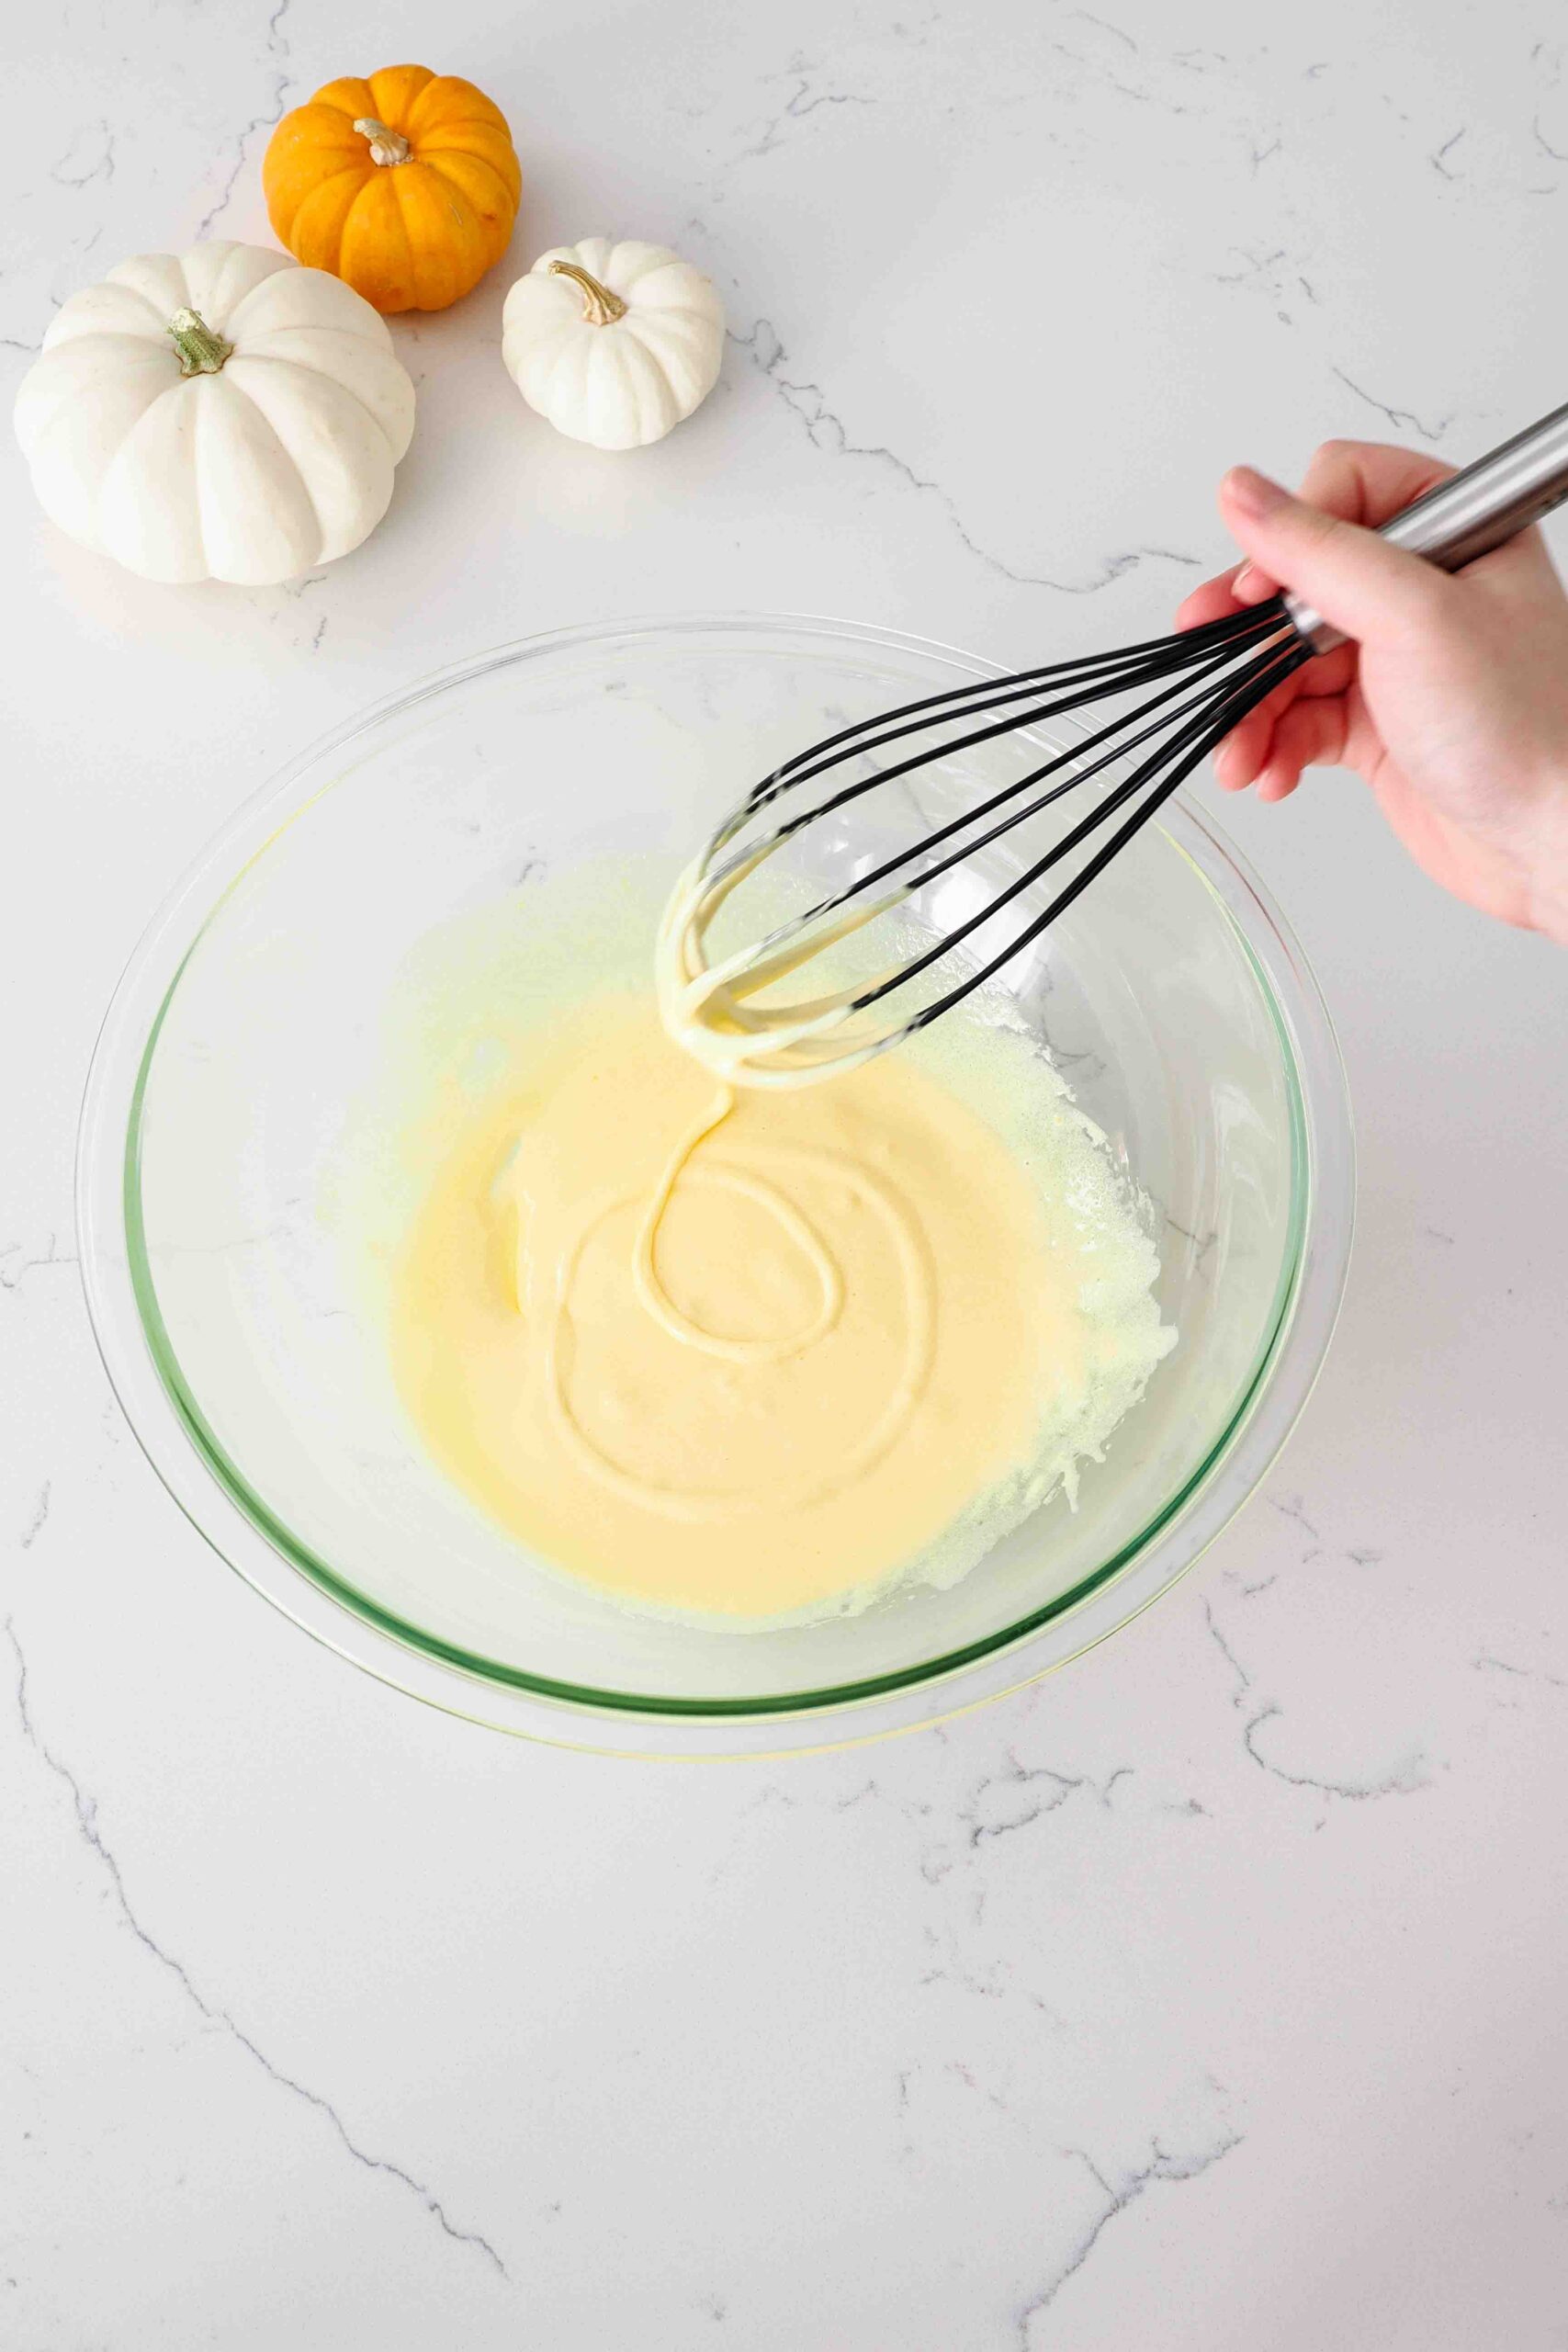 A whisk leaves a trail in a bowl of yolks and sugar.